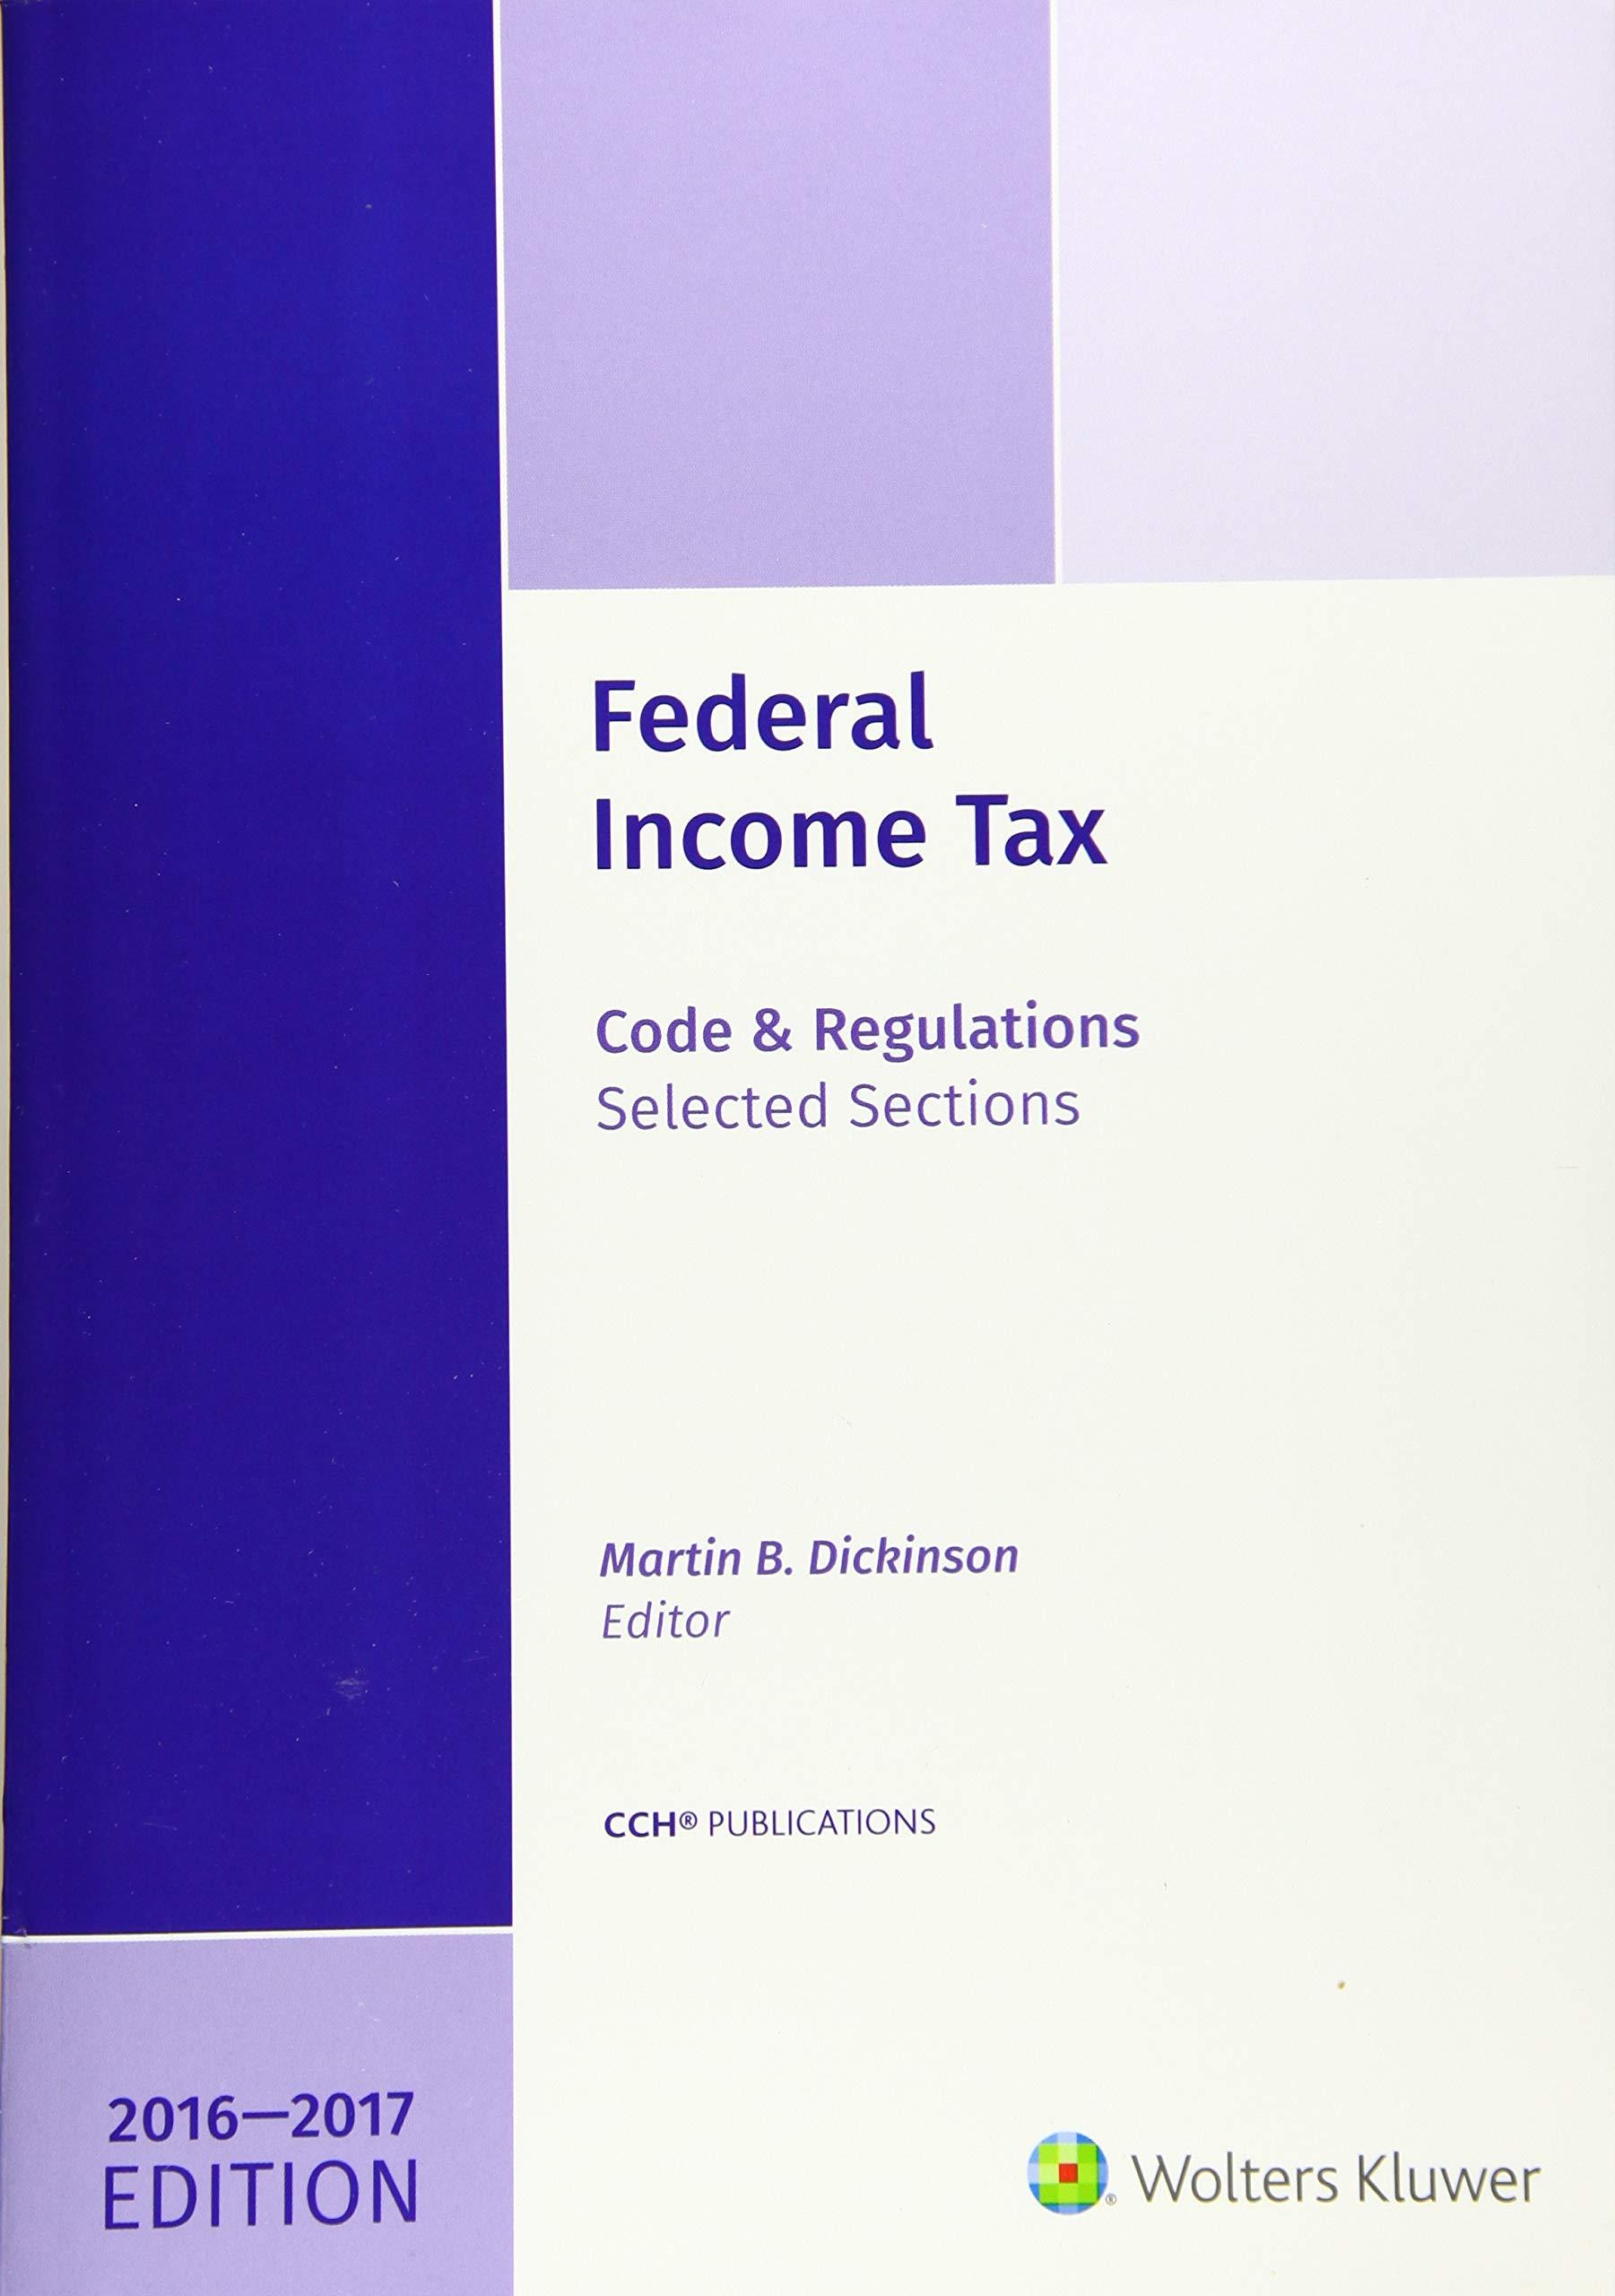 federal income tax code and regulations selected sections 2016-2017 edition martin b. dickinson 0808044168,